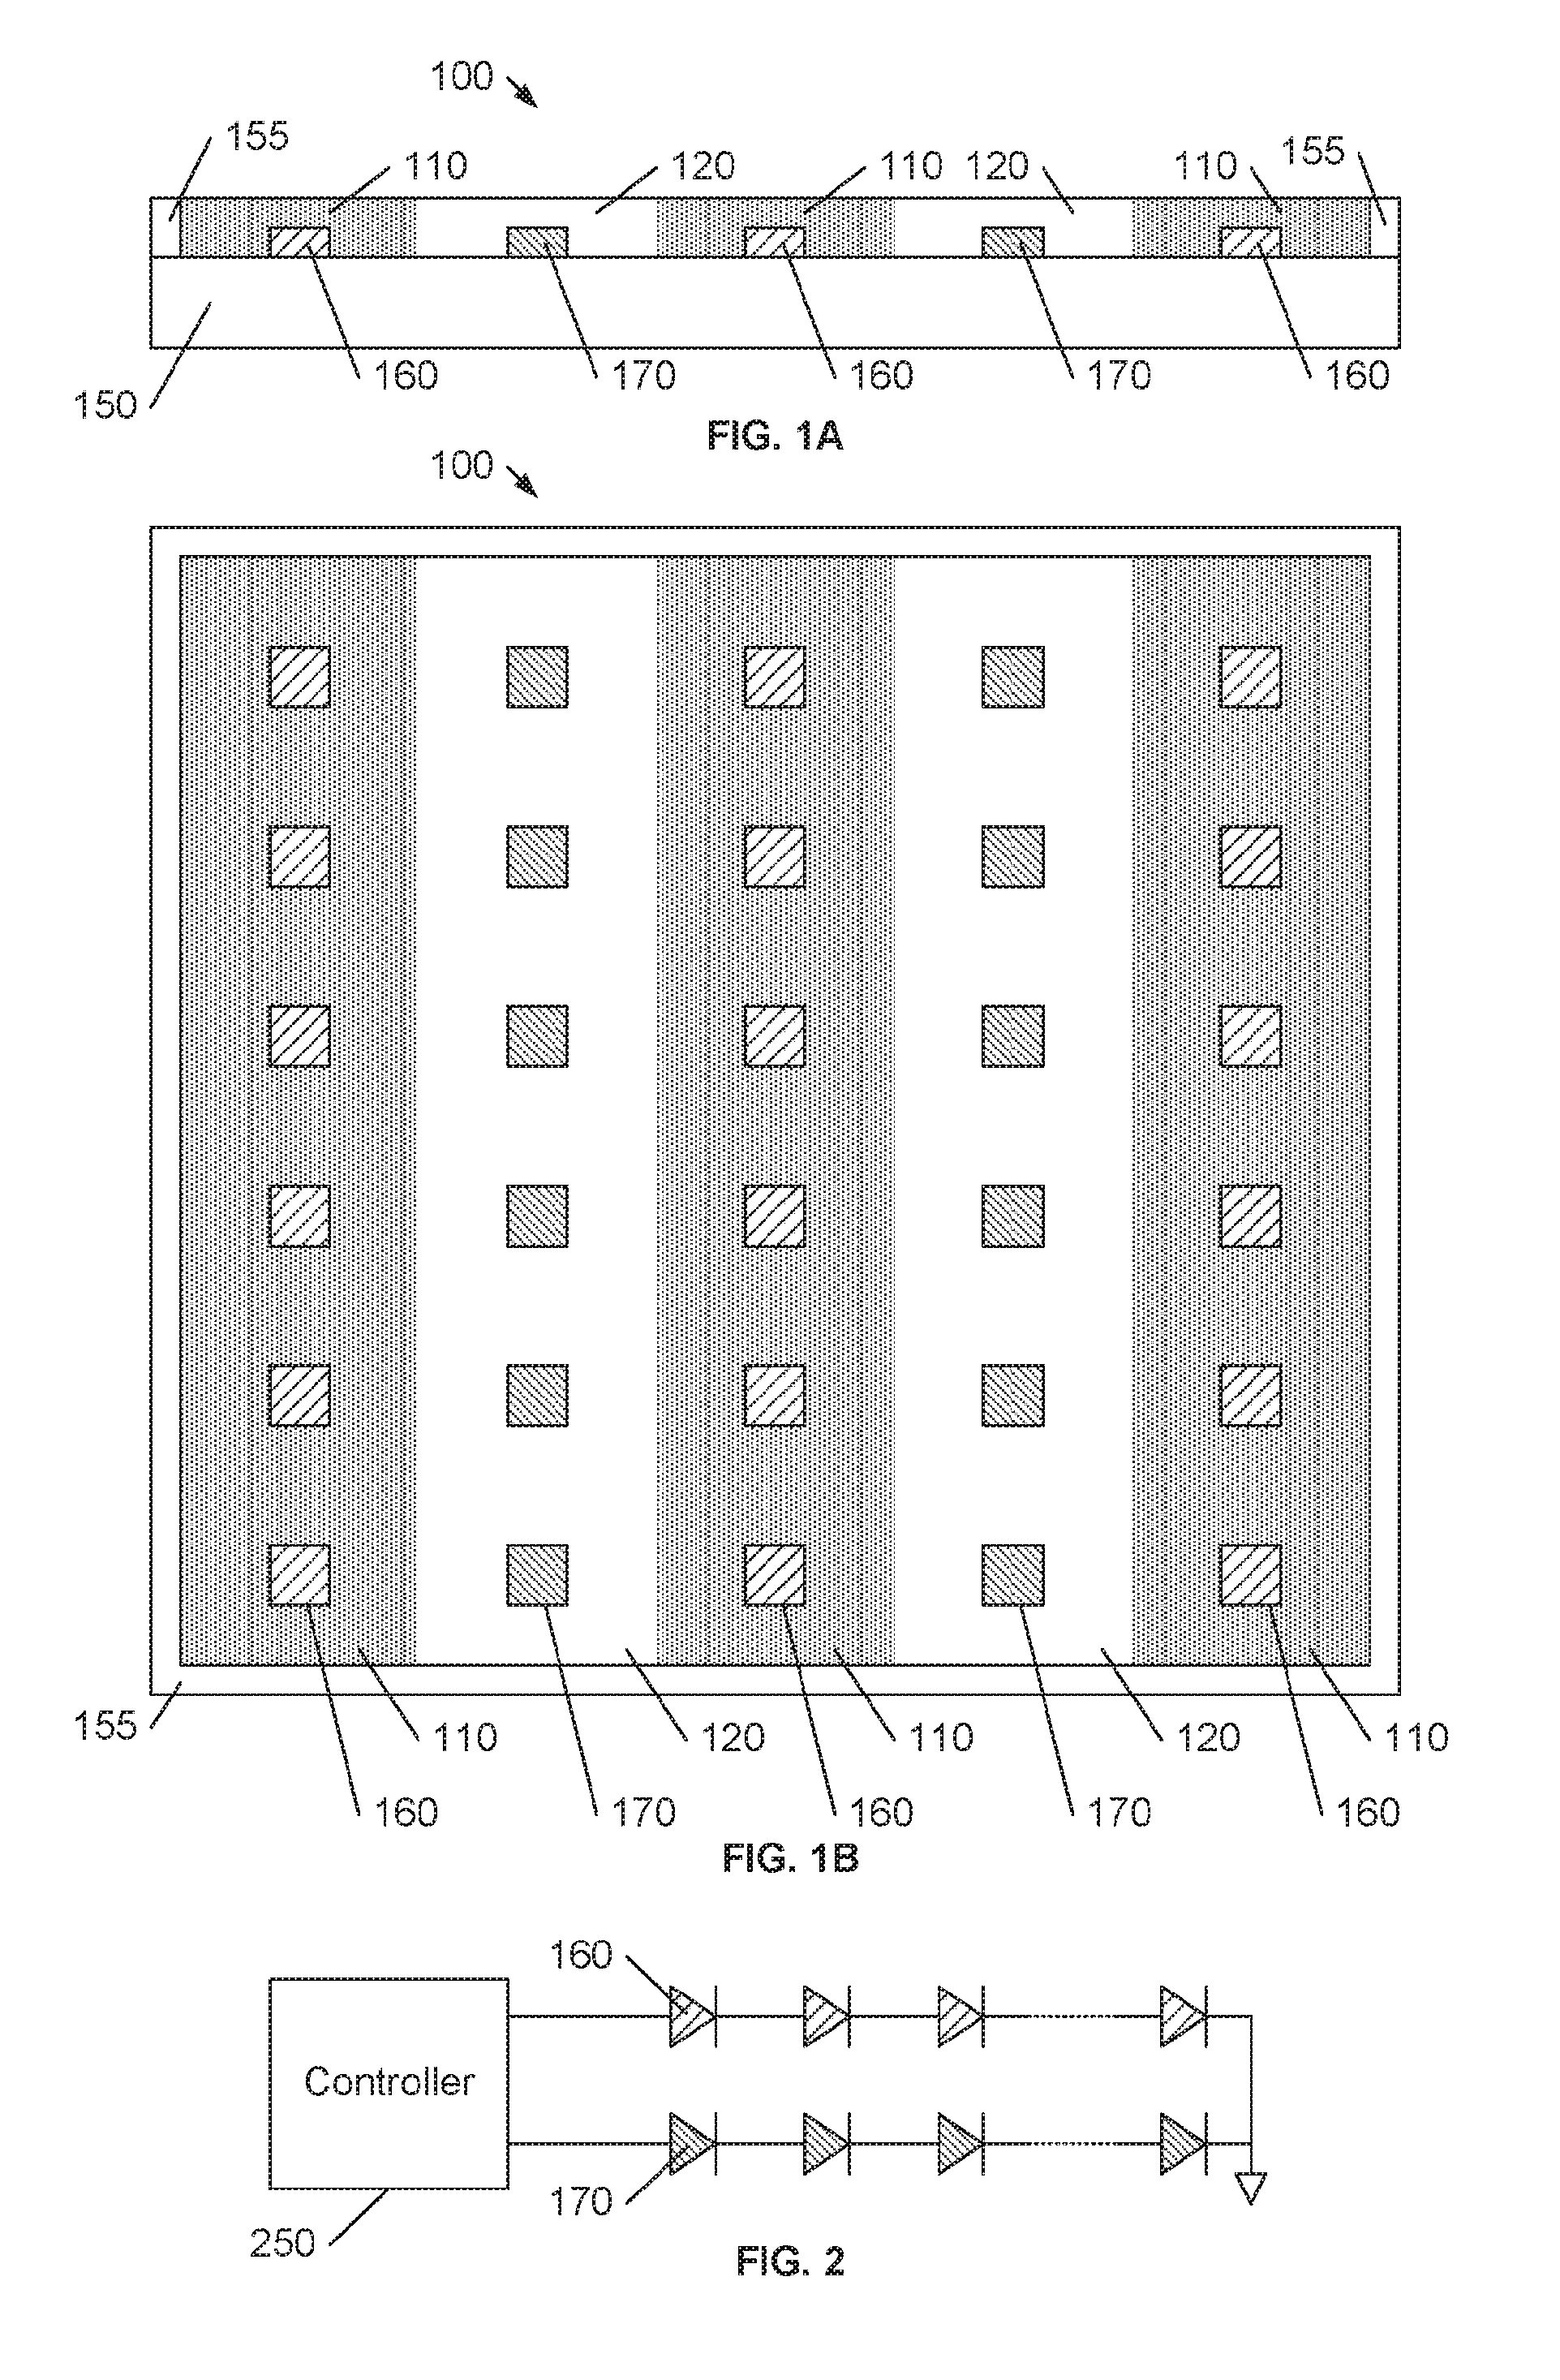 Hybrid chip-on-board LED module with patterned encapsulation